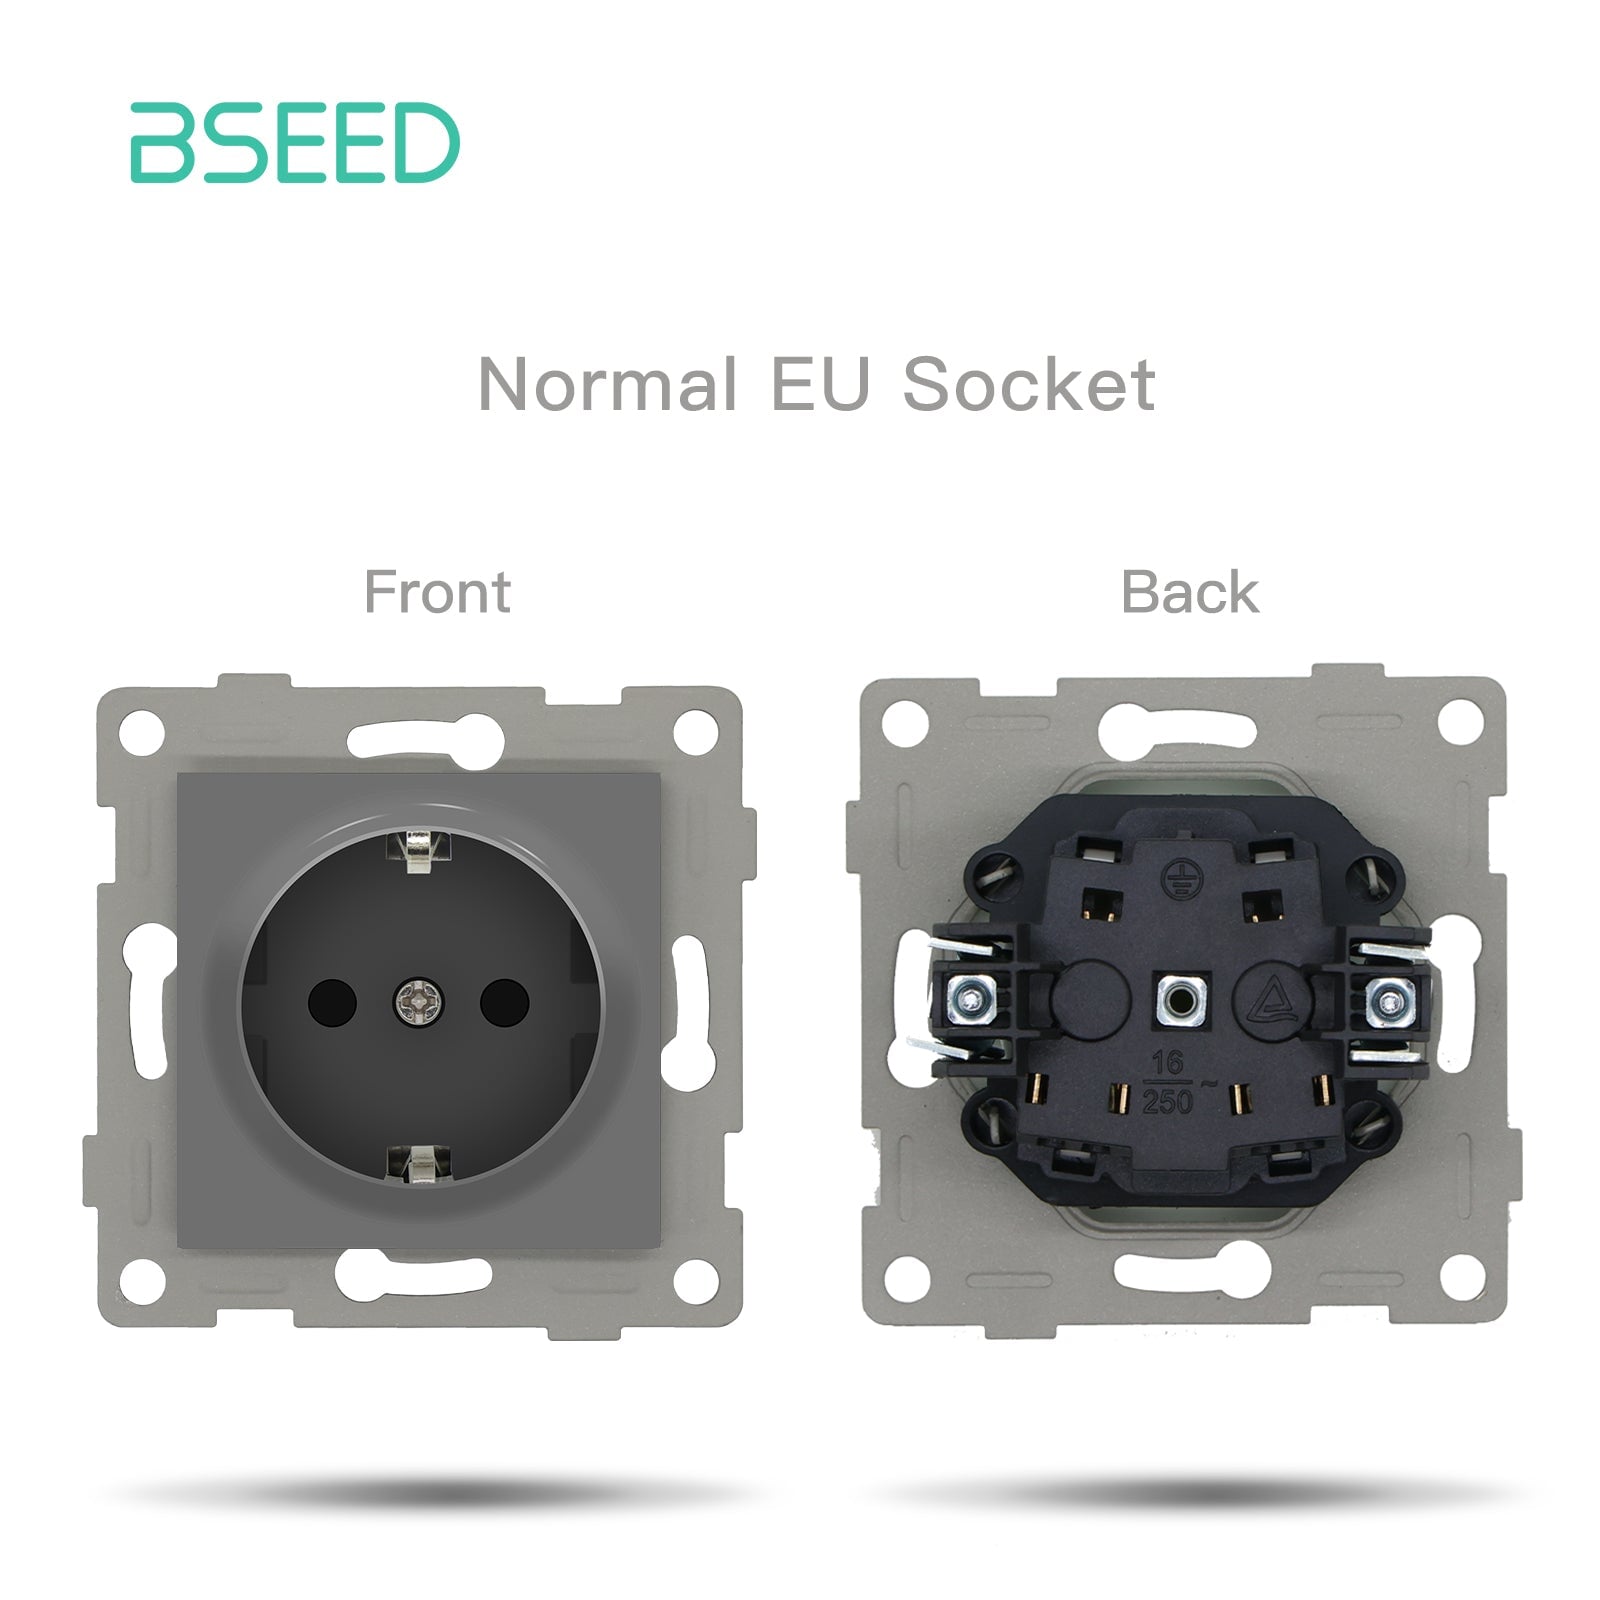 BSEED EU standard Function Key Cover Socket with Claw technology DIY Parts Power Outlets & Sockets Bseedswitch GREY normal eu socket 